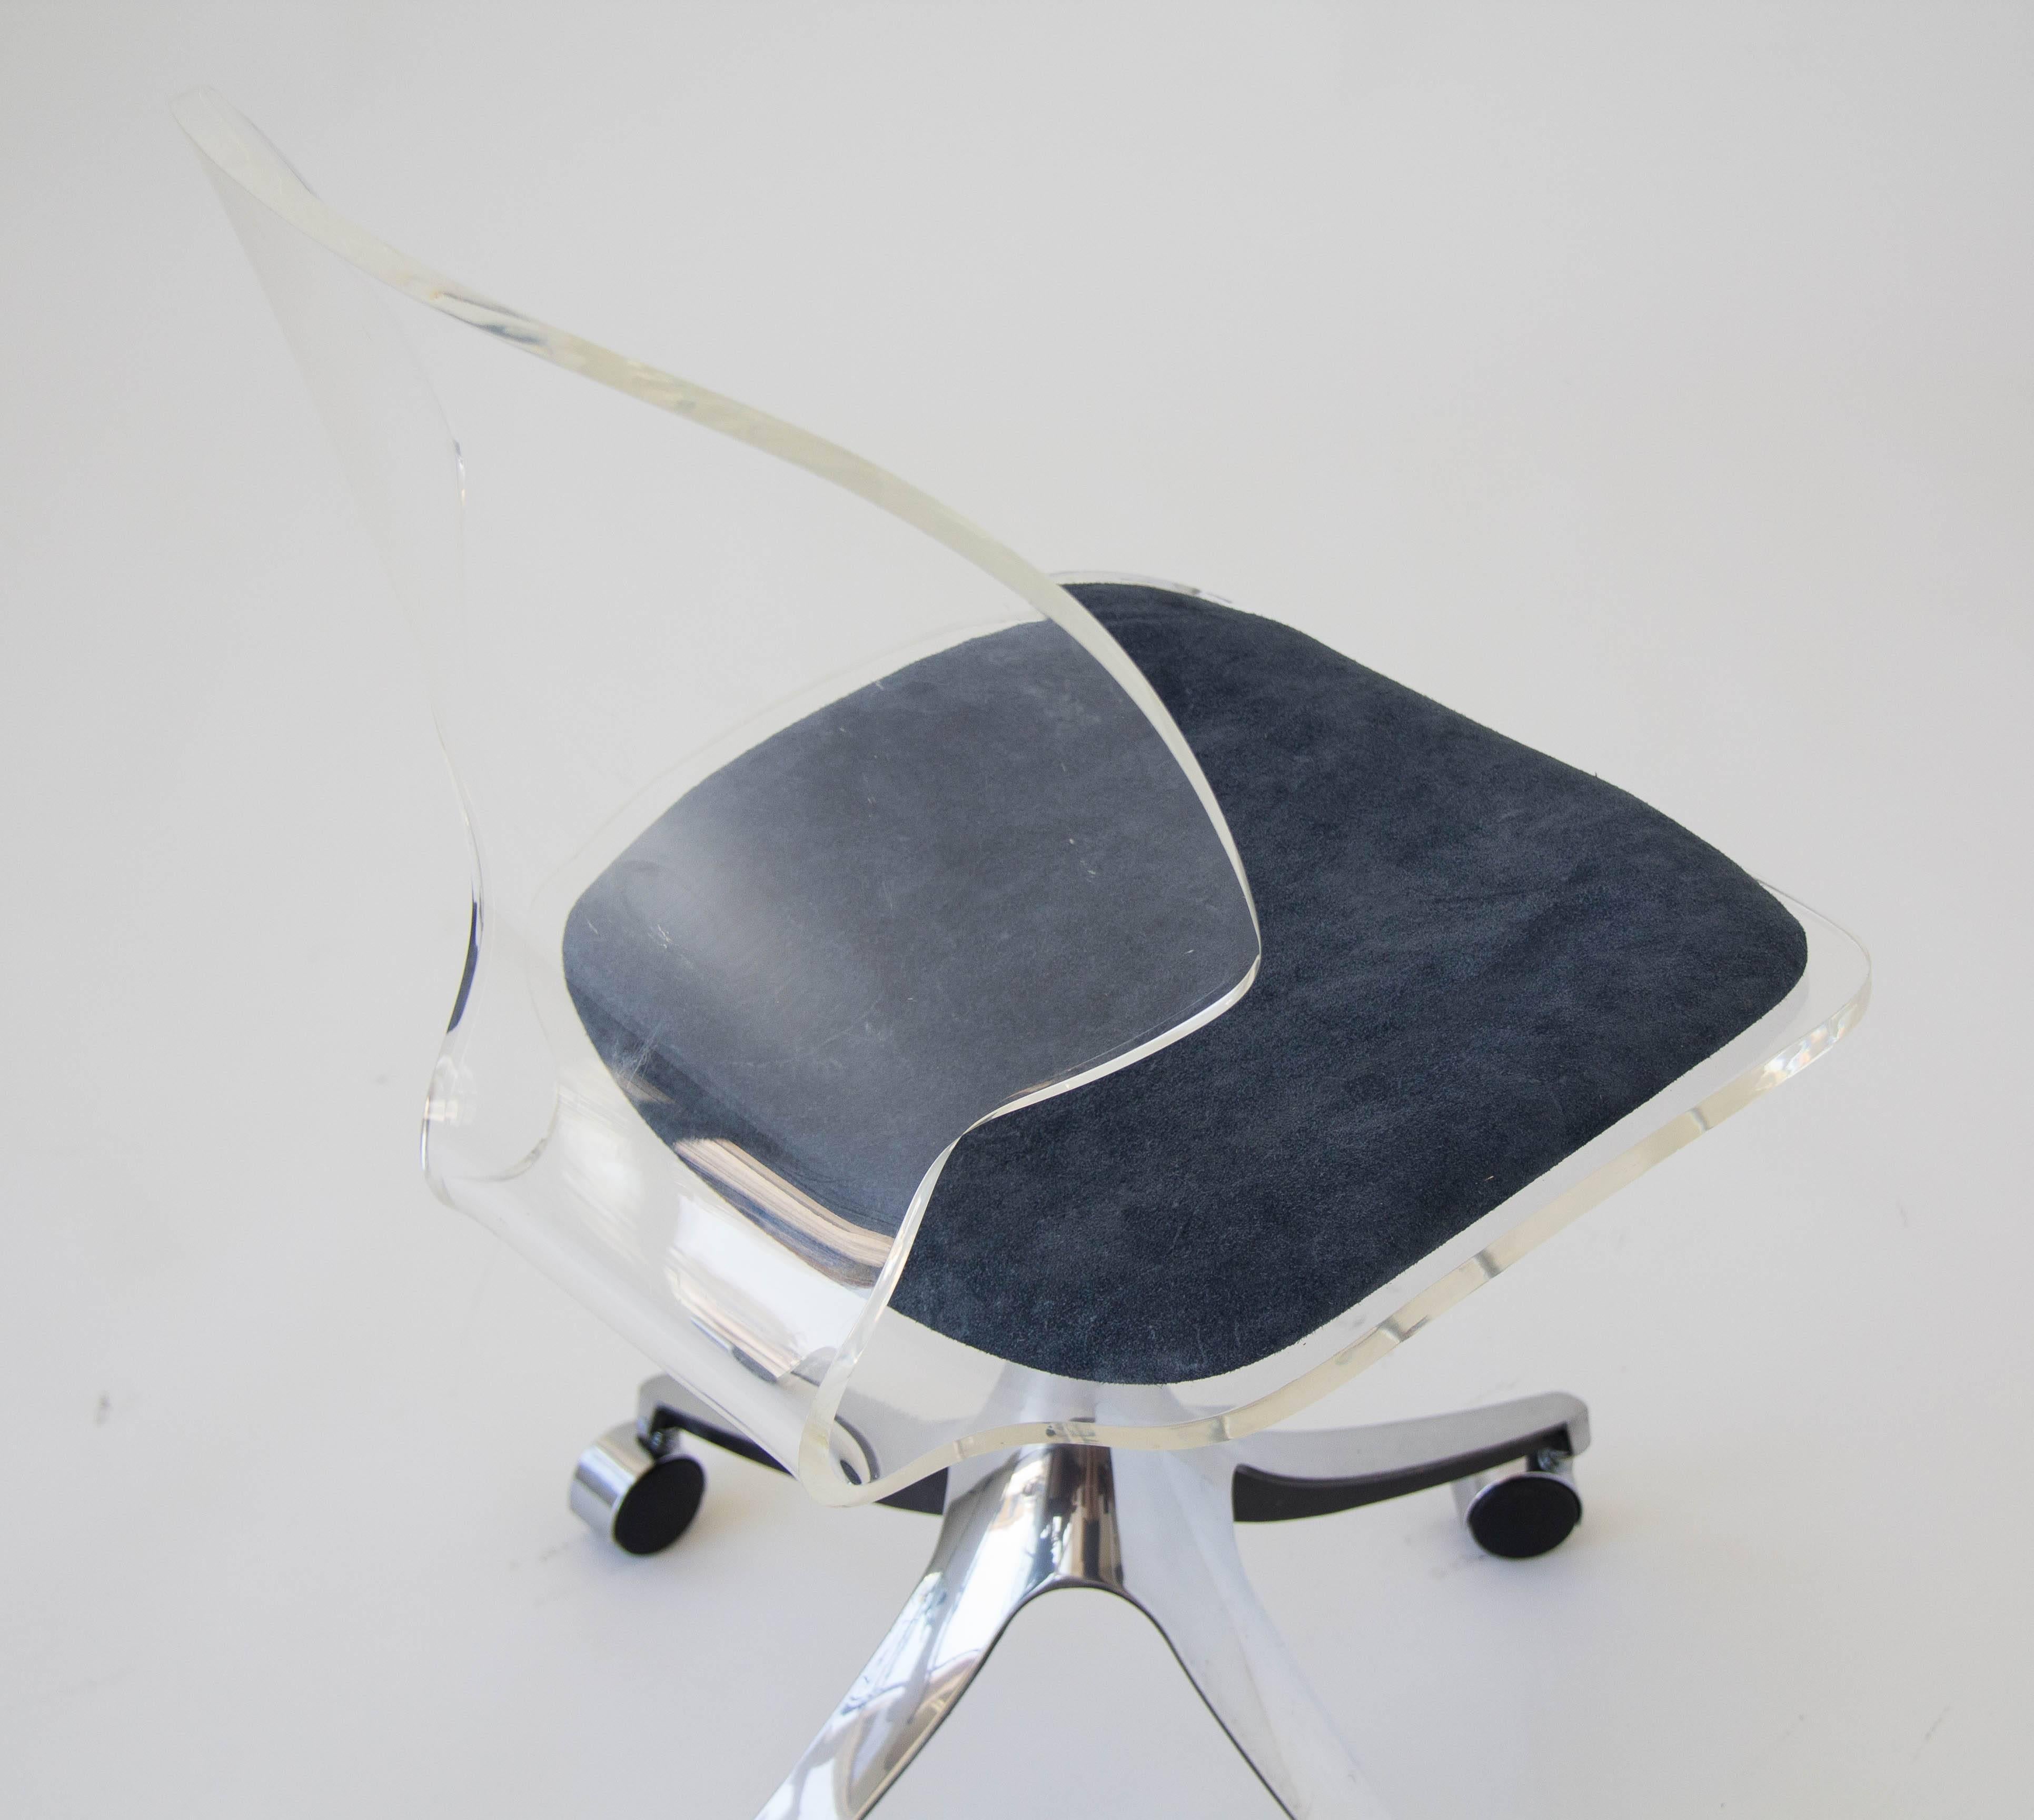 American Hill Manufacturing Co. Lucite Rolling Desk Chair